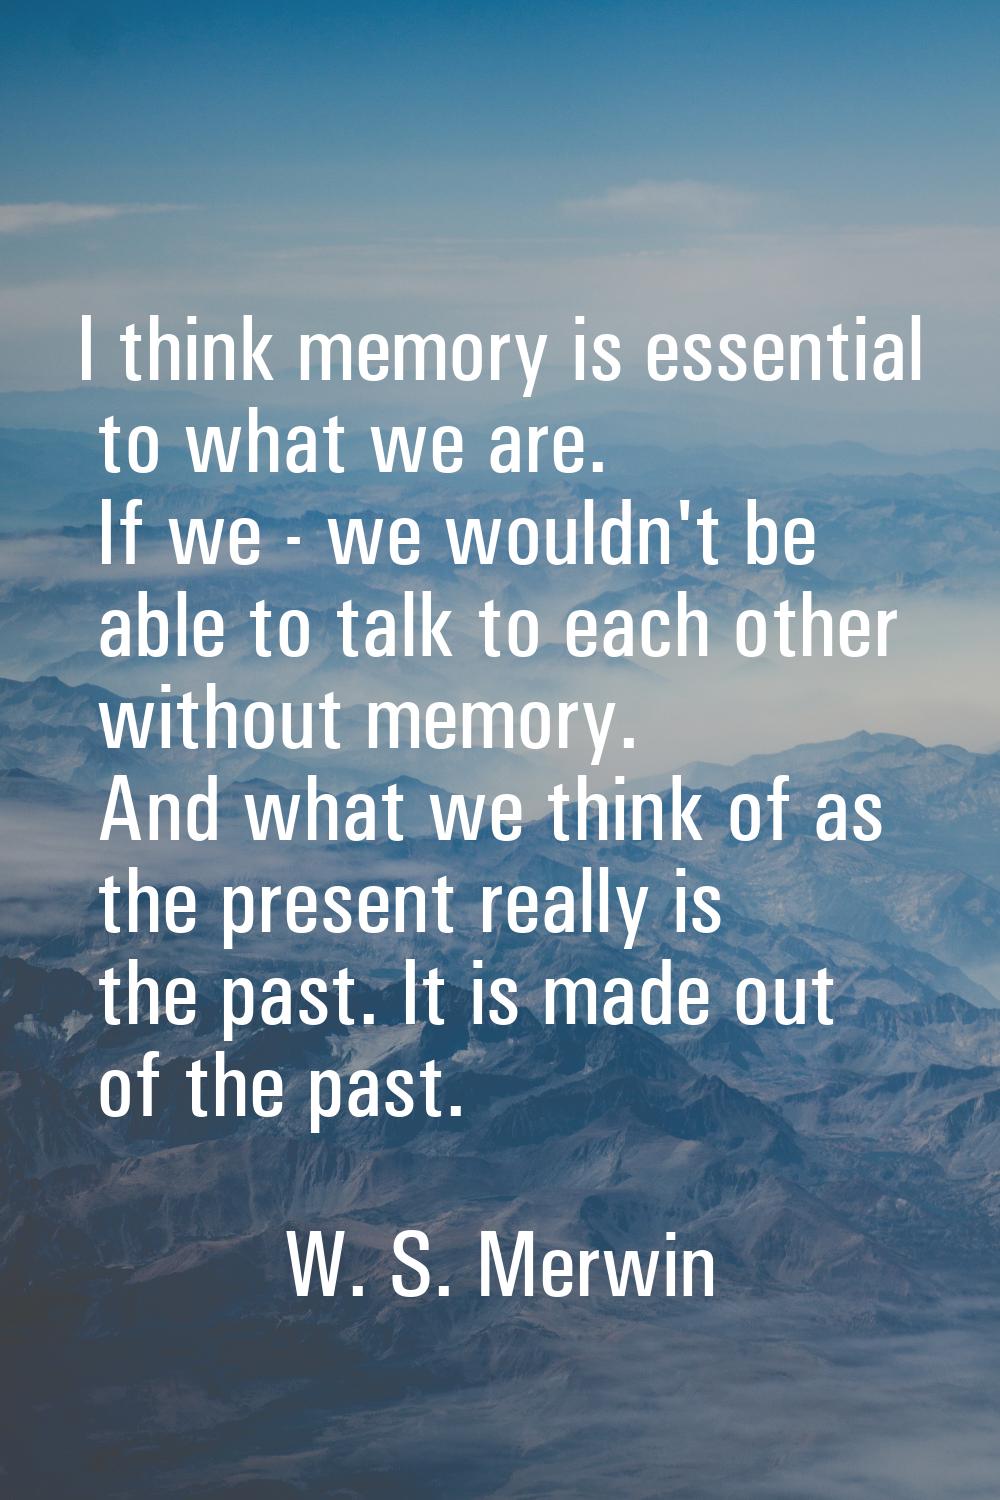 I think memory is essential to what we are. If we - we wouldn't be able to talk to each other witho